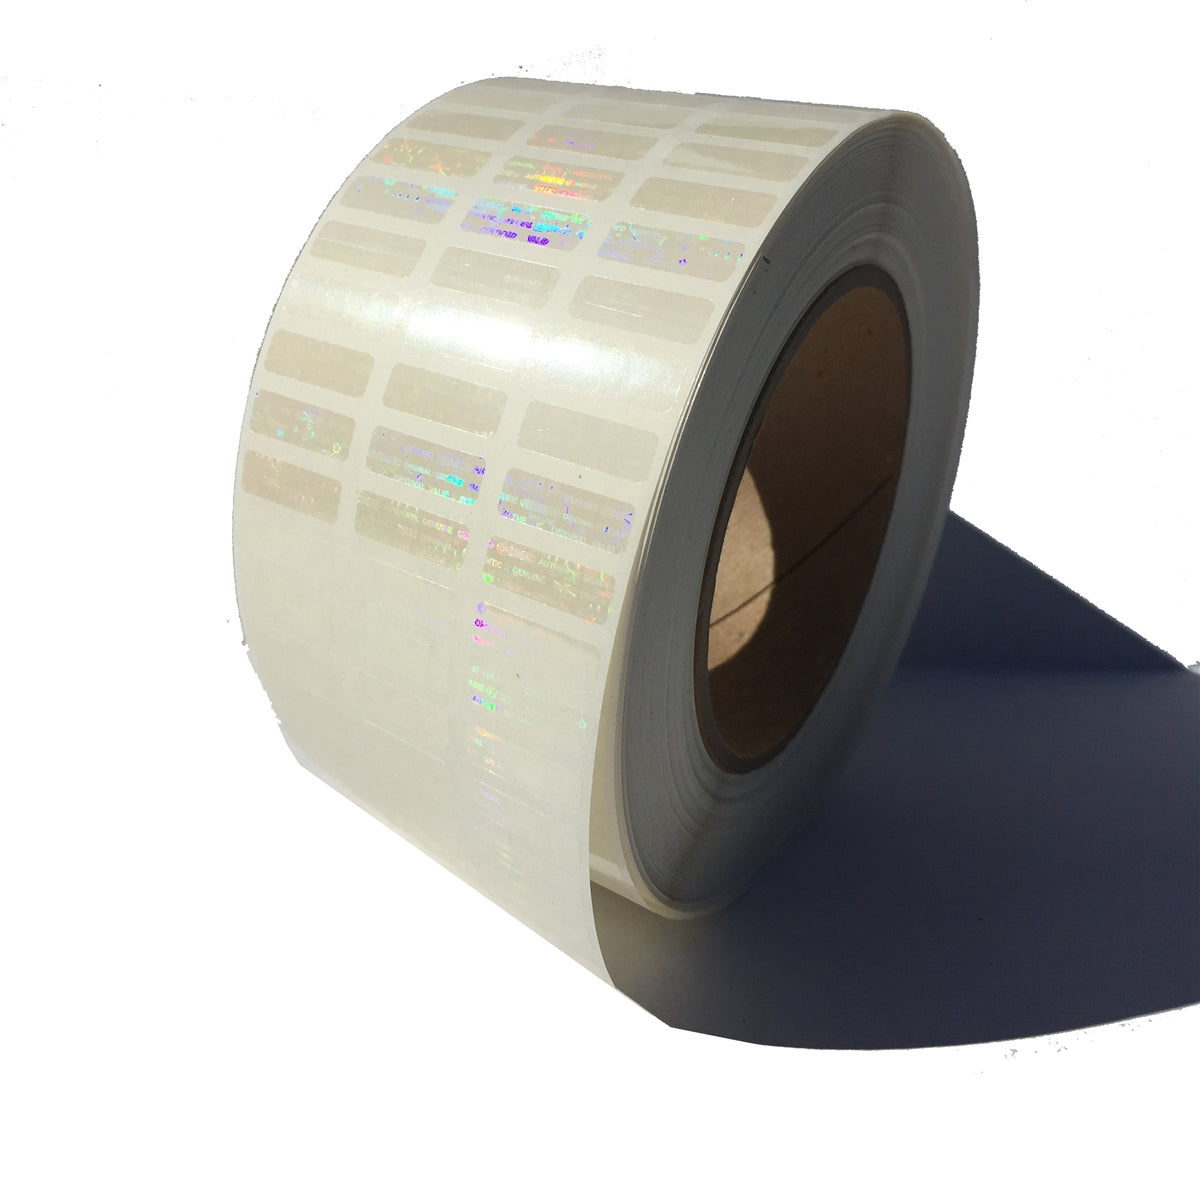 2,000 Clear Tamper Evident Holographic Security Label Seal Sticker, Rectangle 1" x 0.375" (25mm x 9mm).